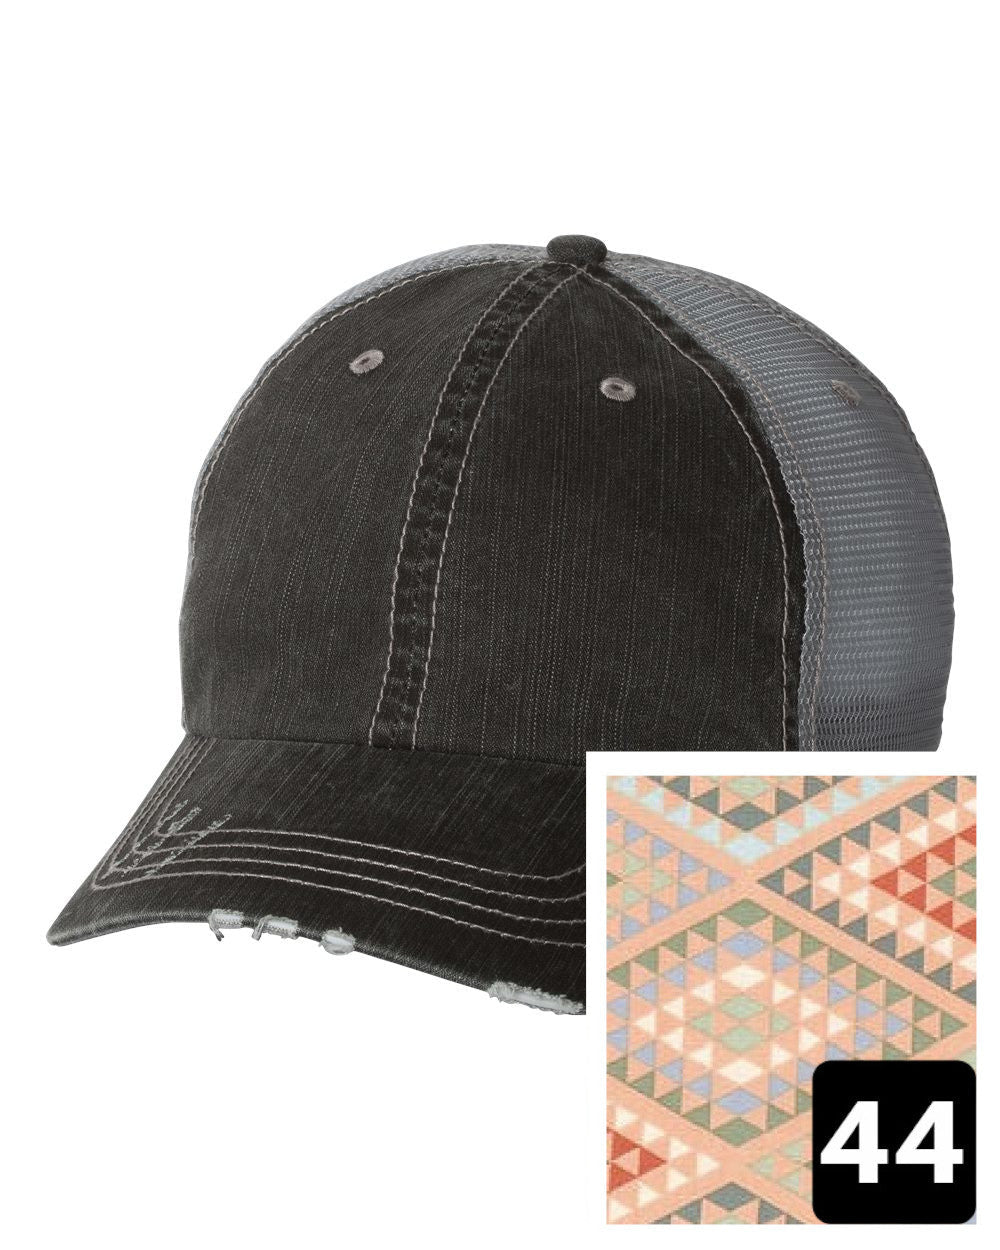 gray distressed trucker hat with navy coral and white chevron fabric state of Wyoming